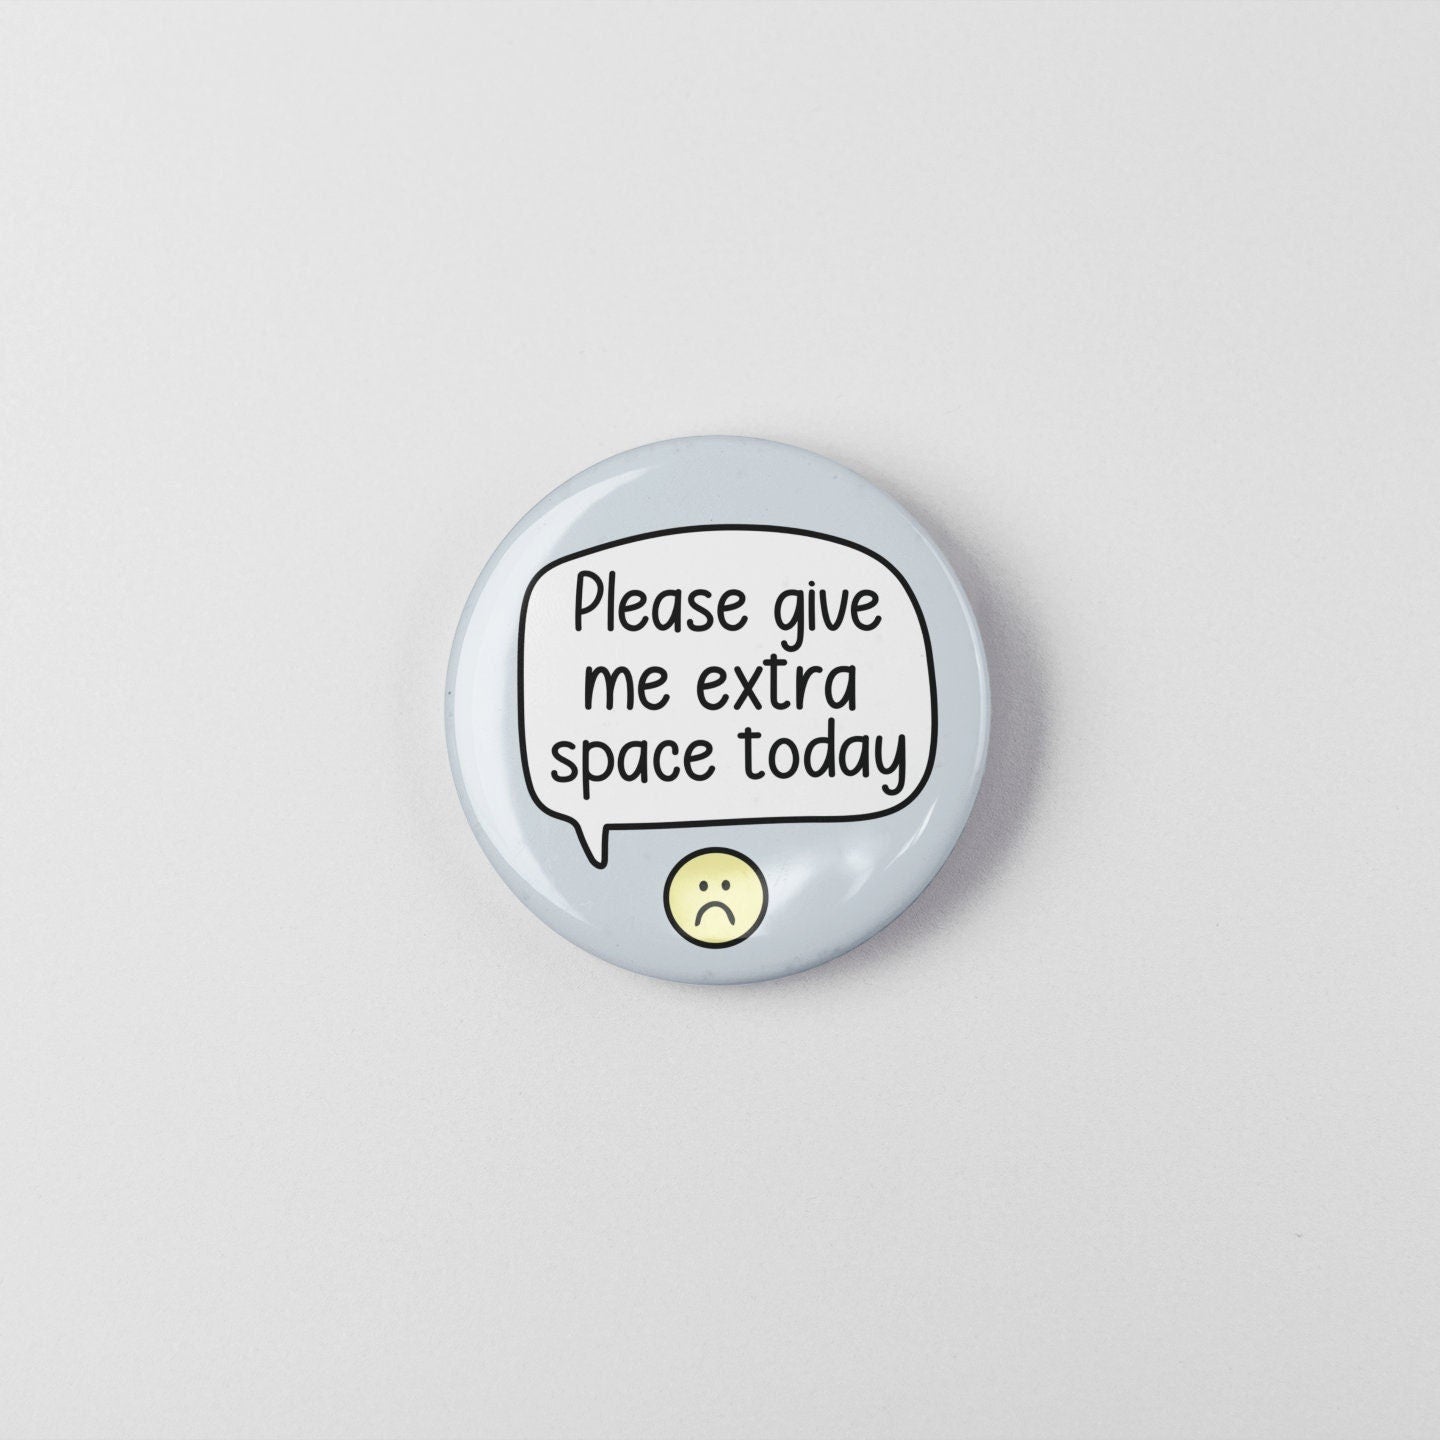 Please Give Me Extra Space Today Badge Pin | Time Out - Give me space - I need space